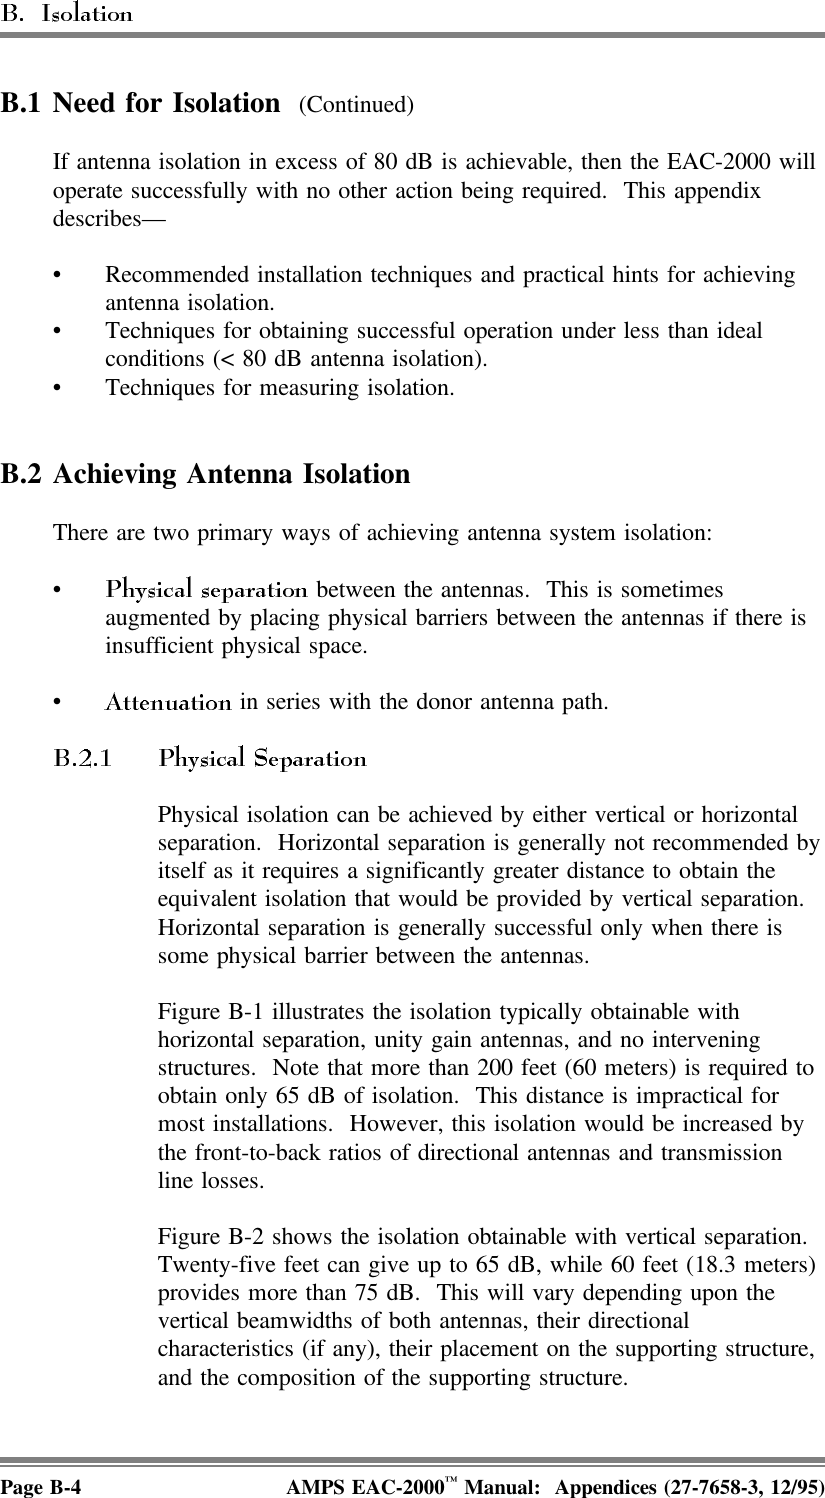 B.1 Need for Isolation  (Continued)If antenna isolation in excess of 80 dB is achievable, then the EAC-2000 willoperate successfully with no other action being required.  This appendixdescribes—• Recommended installation techniques and practical hints for achievingantenna isolation. • Techniques for obtaining successful operation under less than idealconditions (&lt; 80 dB antenna isolation). • Techniques for measuring isolation.B.2 Achieving Antenna IsolationThere are two primary ways of achieving antenna system isolation:• between the antennas.  This is sometimesaugmented by placing physical barriers between the antennas if there isinsufficient physical space.• in series with the donor antenna path.Physical isolation can be achieved by either vertical or horizontalseparation.  Horizontal separation is generally not recommended byitself as it requires a significantly greater distance to obtain theequivalent isolation that would be provided by vertical separation. Horizontal separation is generally successful only when there issome physical barrier between the antennas.Figure B-1 illustrates the isolation typically obtainable withhorizontal separation, unity gain antennas, and no interveningstructures.  Note that more than 200 feet (60 meters) is required toobtain only 65 dB of isolation.  This distance is impractical formost installations.  However, this isolation would be increased bythe front-to-back ratios of directional antennas and transmissionline losses.Figure B-2 shows the isolation obtainable with vertical separation. Twenty-five feet can give up to 65 dB, while 60 feet (18.3 meters)provides more than 75 dB.  This will vary depending upon thevertical beamwidths of both antennas, their directionalcharacteristics (if any), their placement on the supporting structure,and the composition of the supporting structure.Page B-4 AMPS EAC-2000™ Manual:  Appendices (27-7658-3, 12/95)